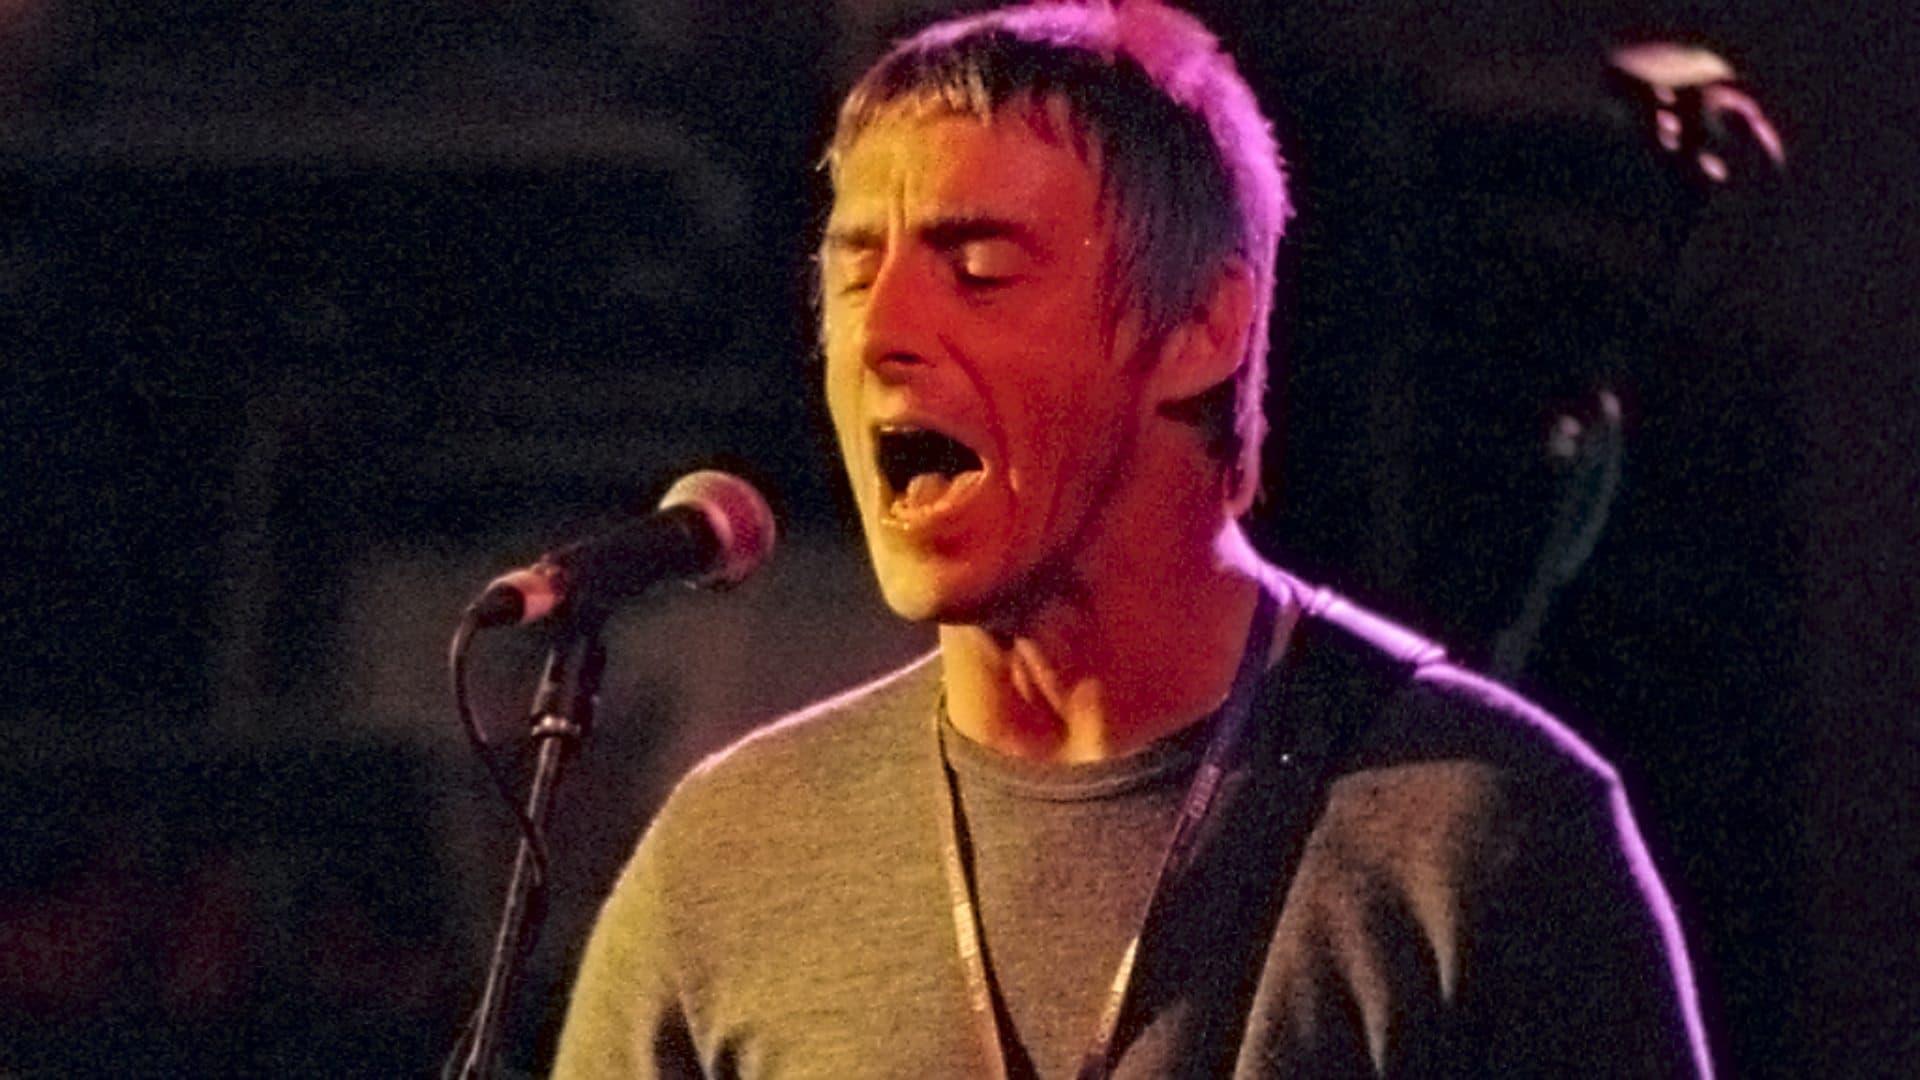 Paul Weller: BBC Four Sessions backdrop